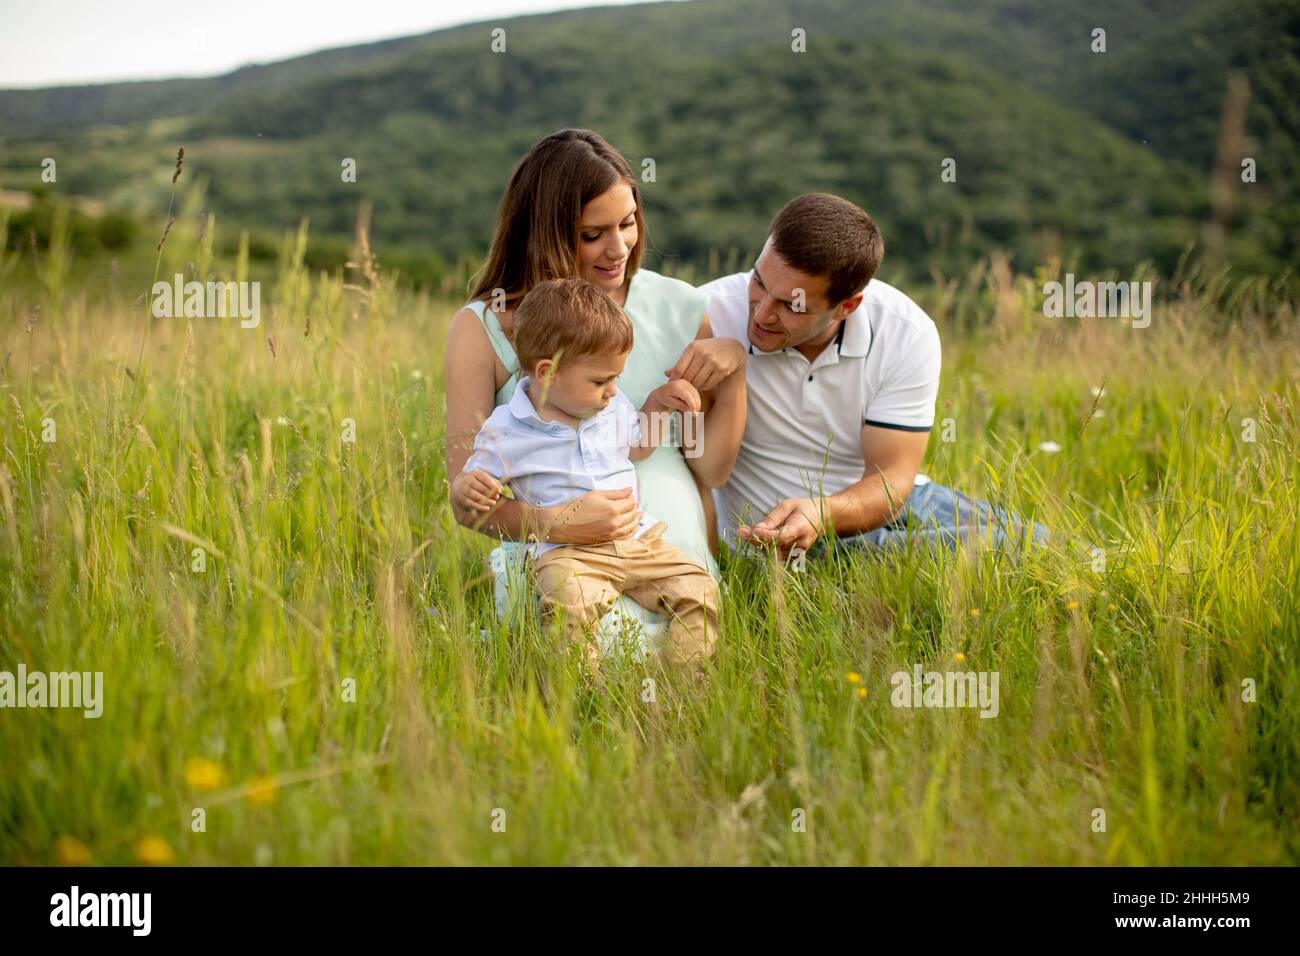 Young family having fun outdoors in the summer field Stock Photo